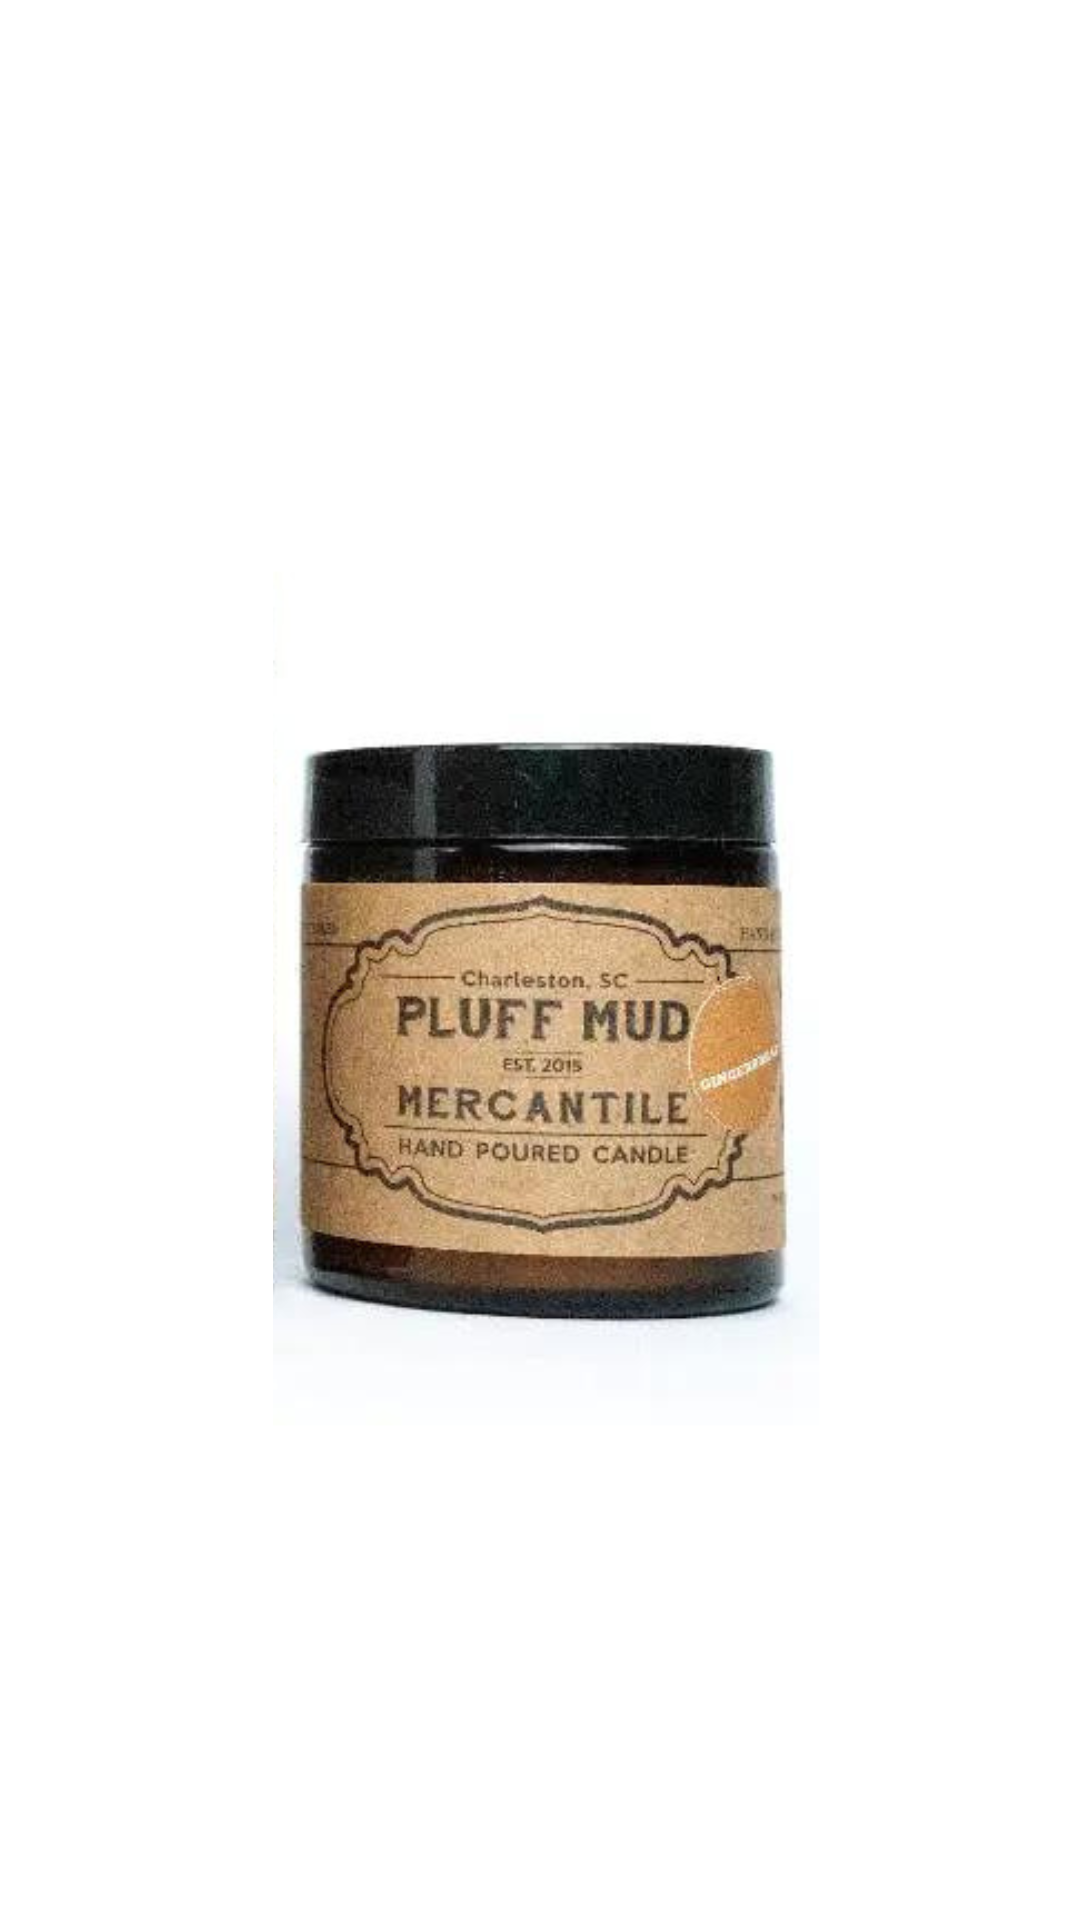 Pecan Pie Hand Poured Soy Candle - Pluff Mud Mercantile